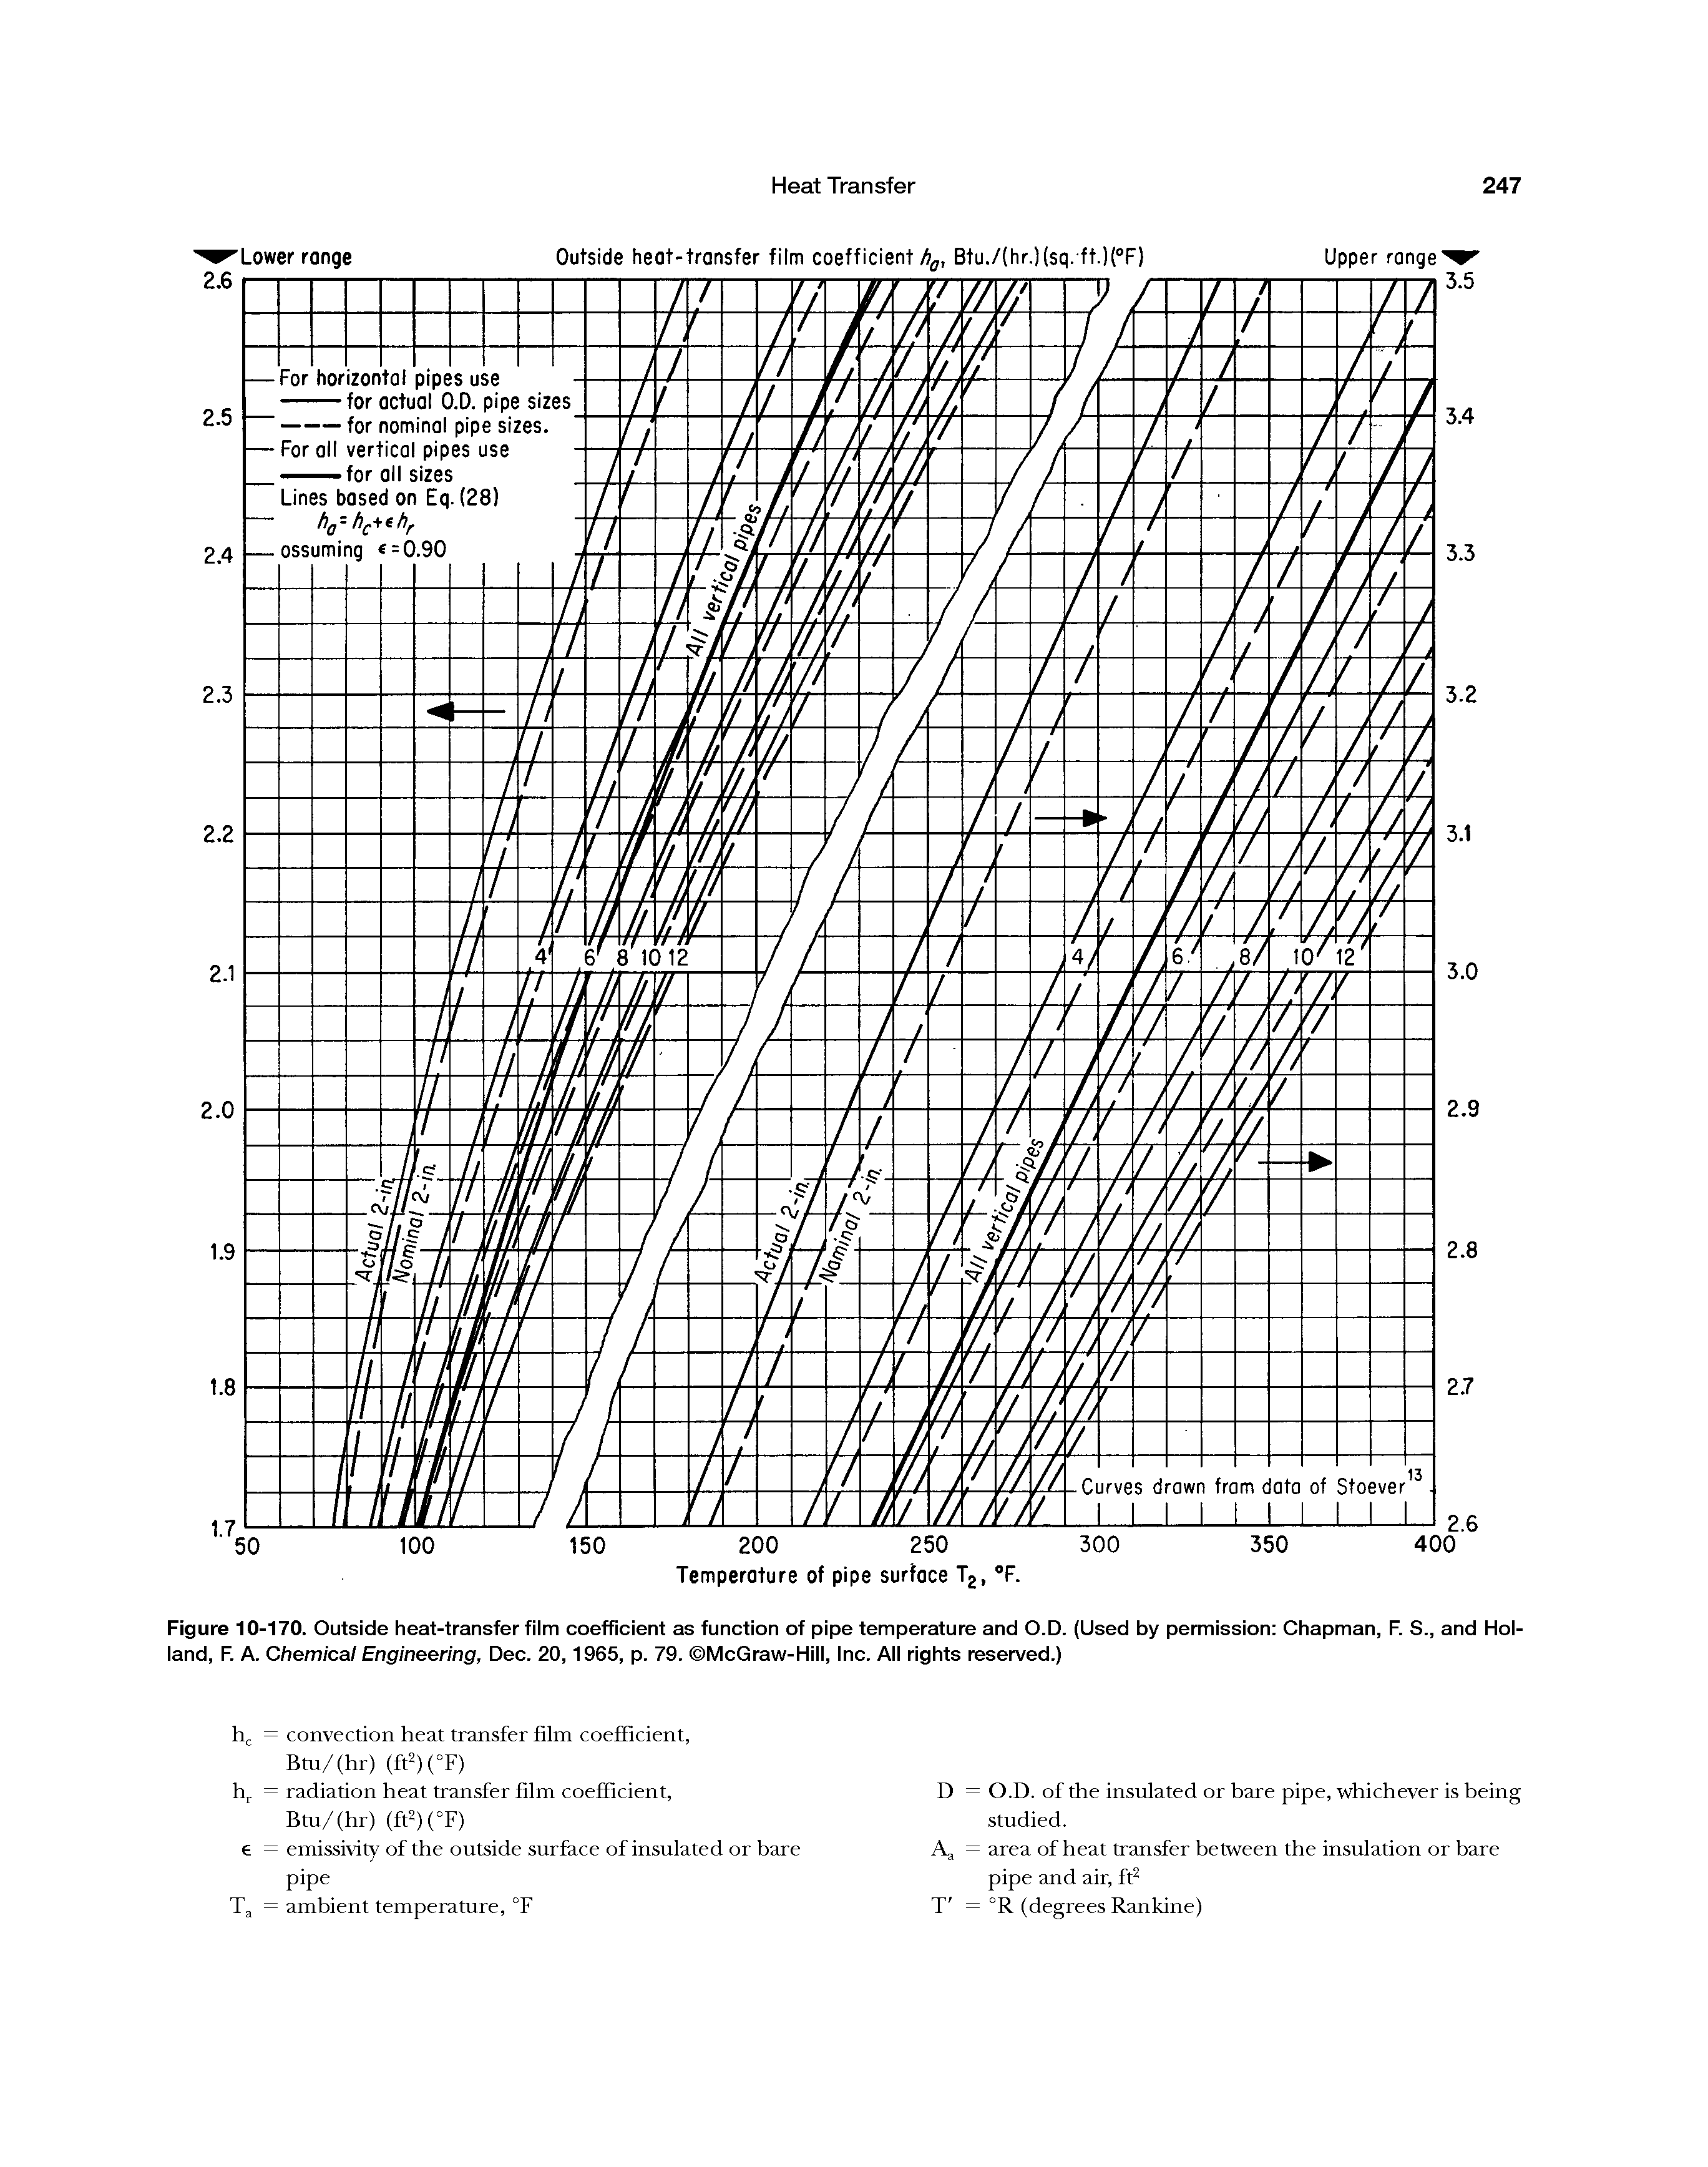 Figure 10-170. Outside heat-transfer film coefficient as function of pipe temperature and O.D. (Used by permission Chapman, F. S., and Holland, F. A. Chemical Engineering, Dec. 20,1965, p. 79. McGraw-Hill, Inc. All rights reserved.)...